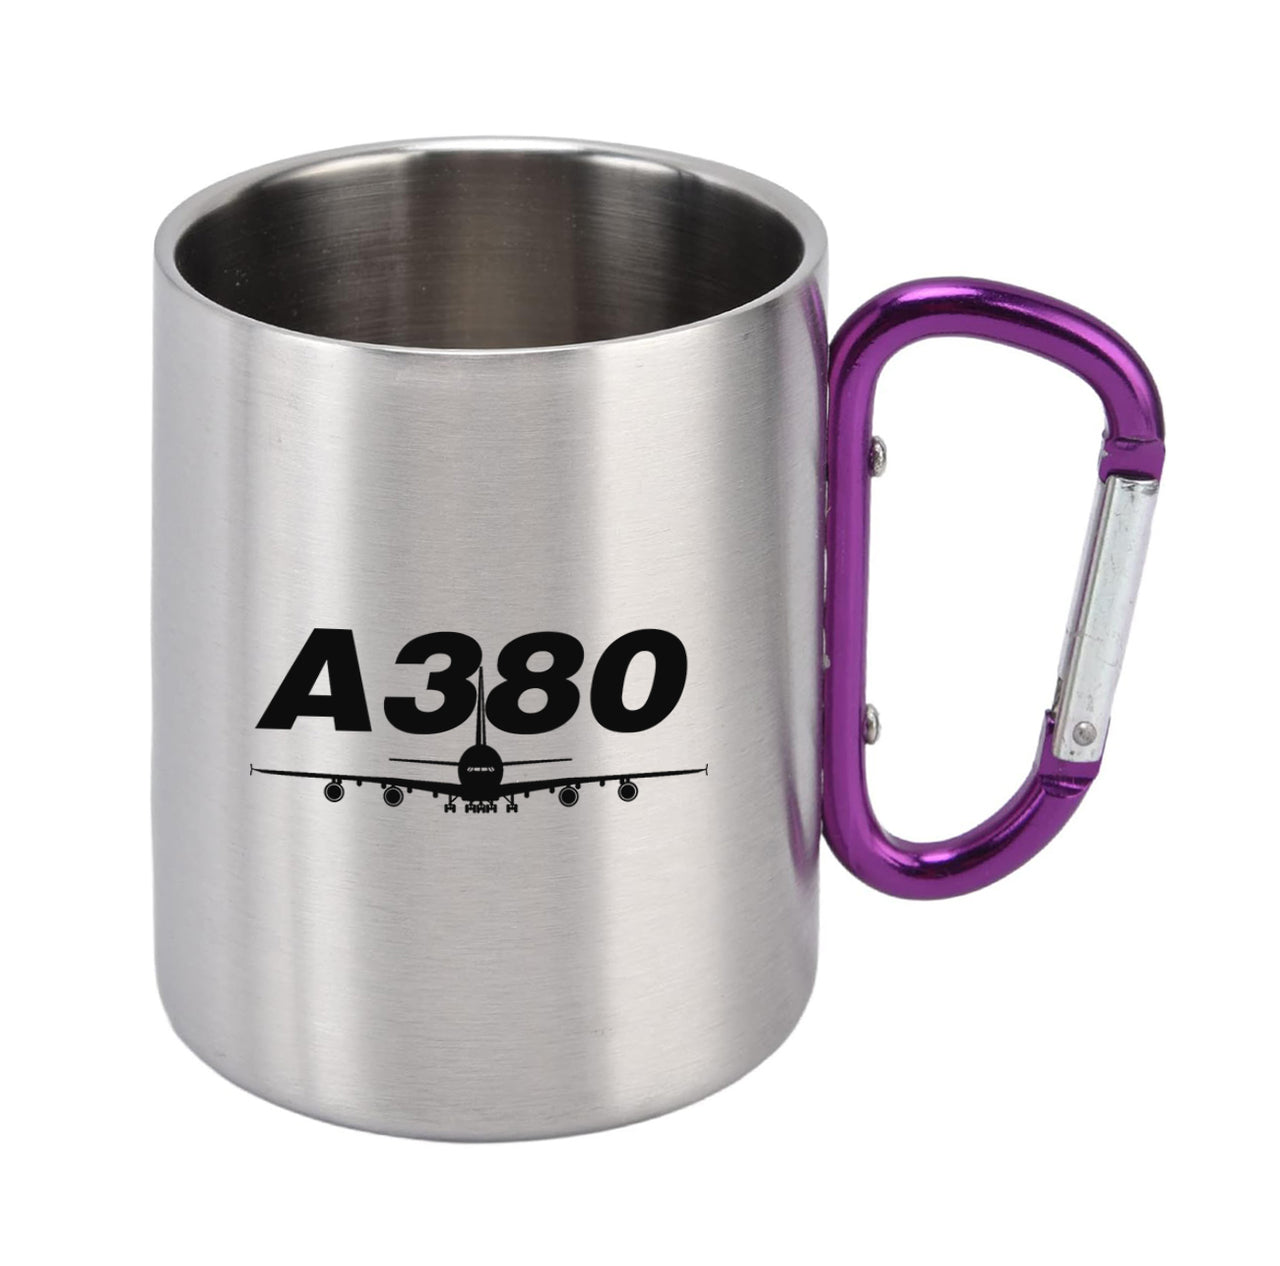 Super Airbus A380 Designed Stainless Steel Outdoors Mugs